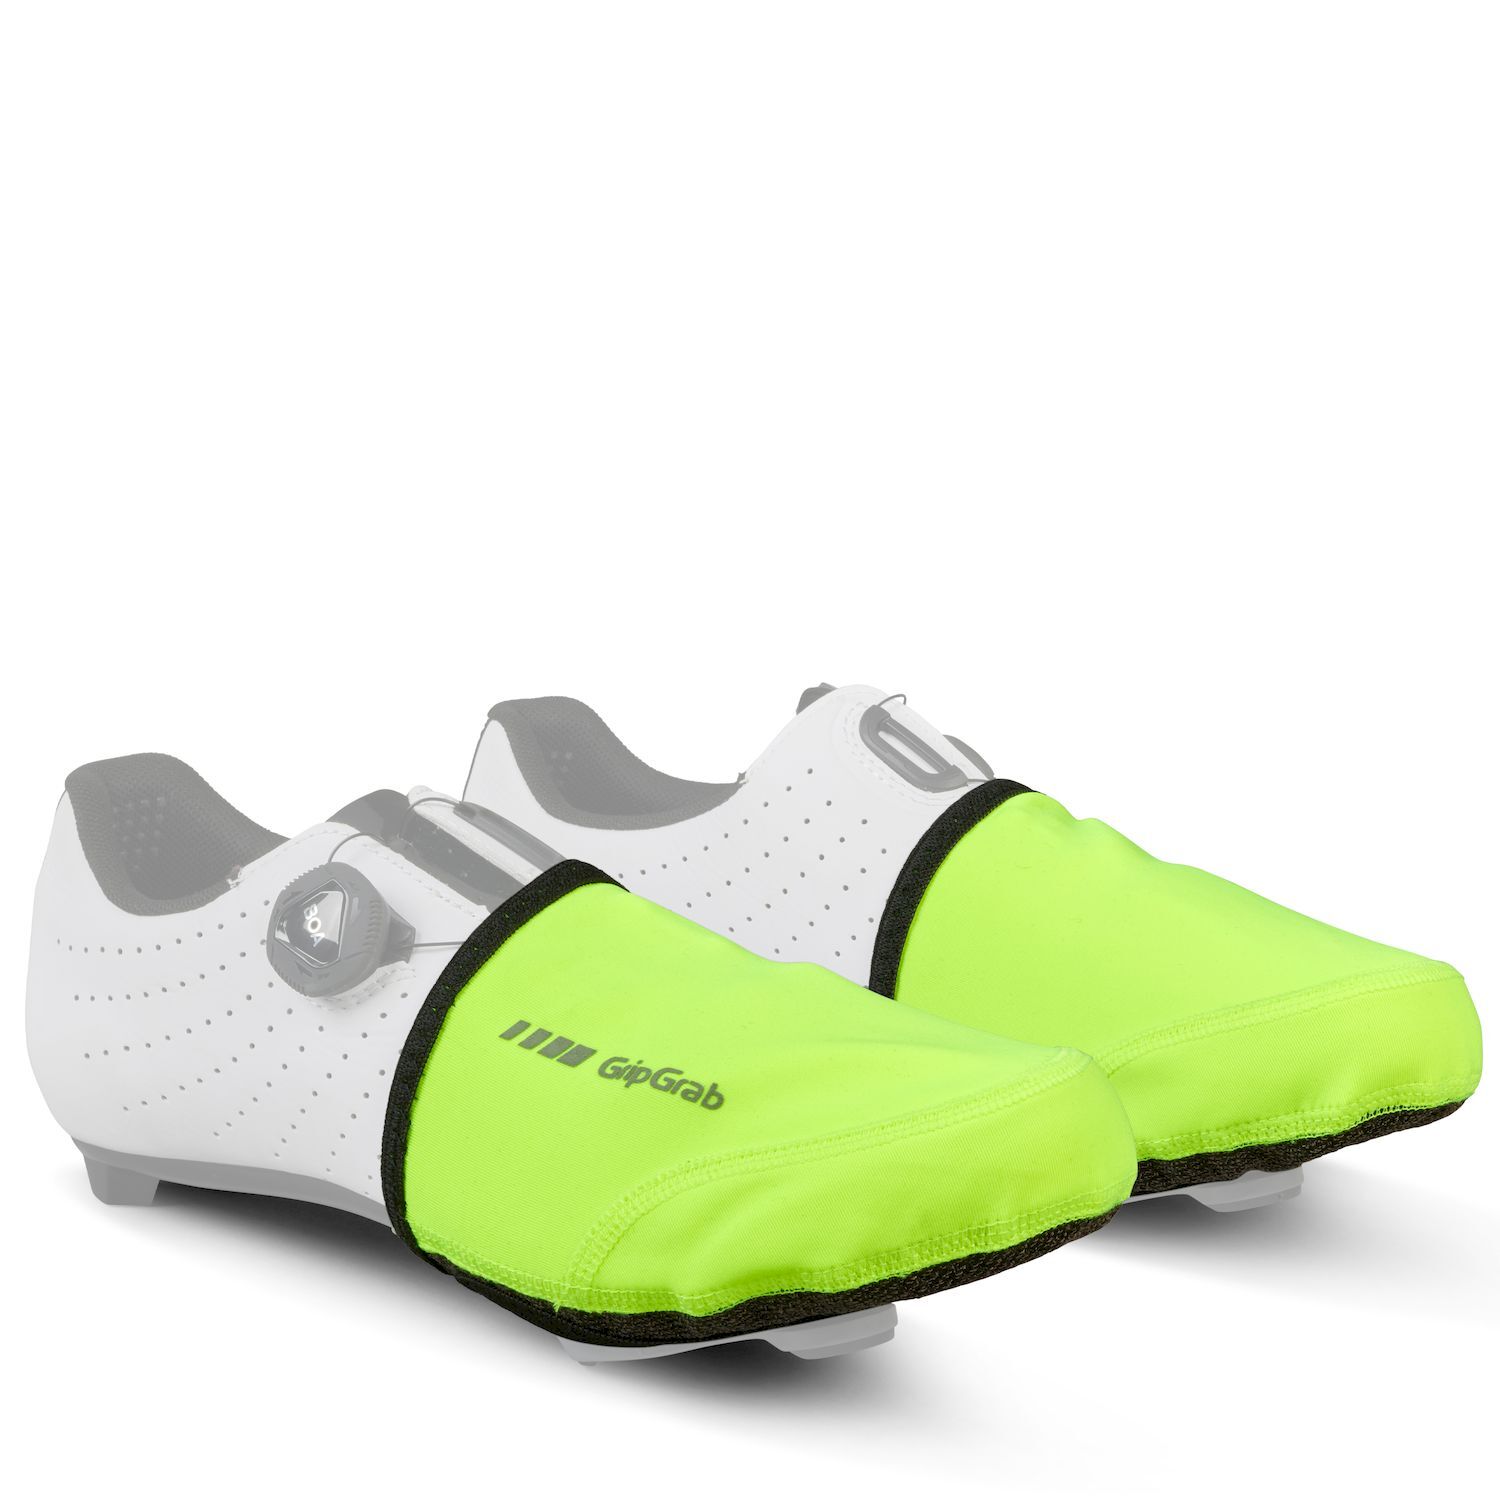 GripGrab Windproof Hi-Vis Toe Covers - Cycling overshoes